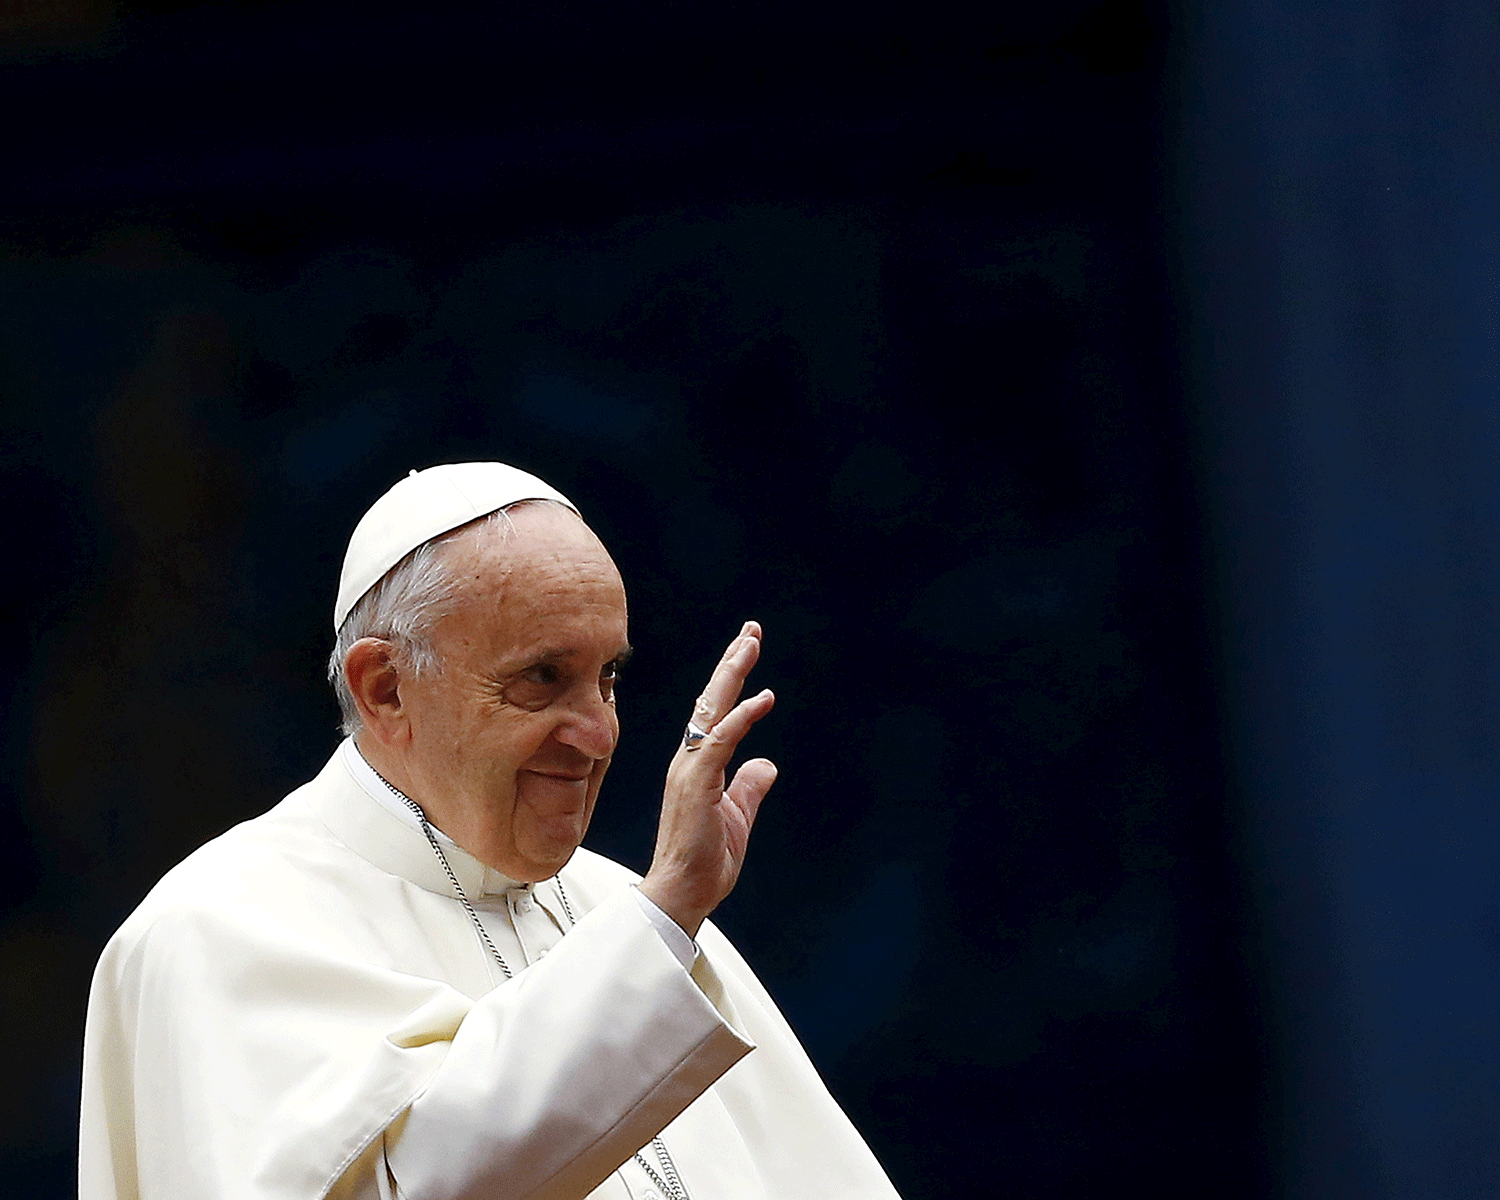 The Pope said the Church needed a 'healthy dose of self-criticism' for suggesting marriage was only for procreation